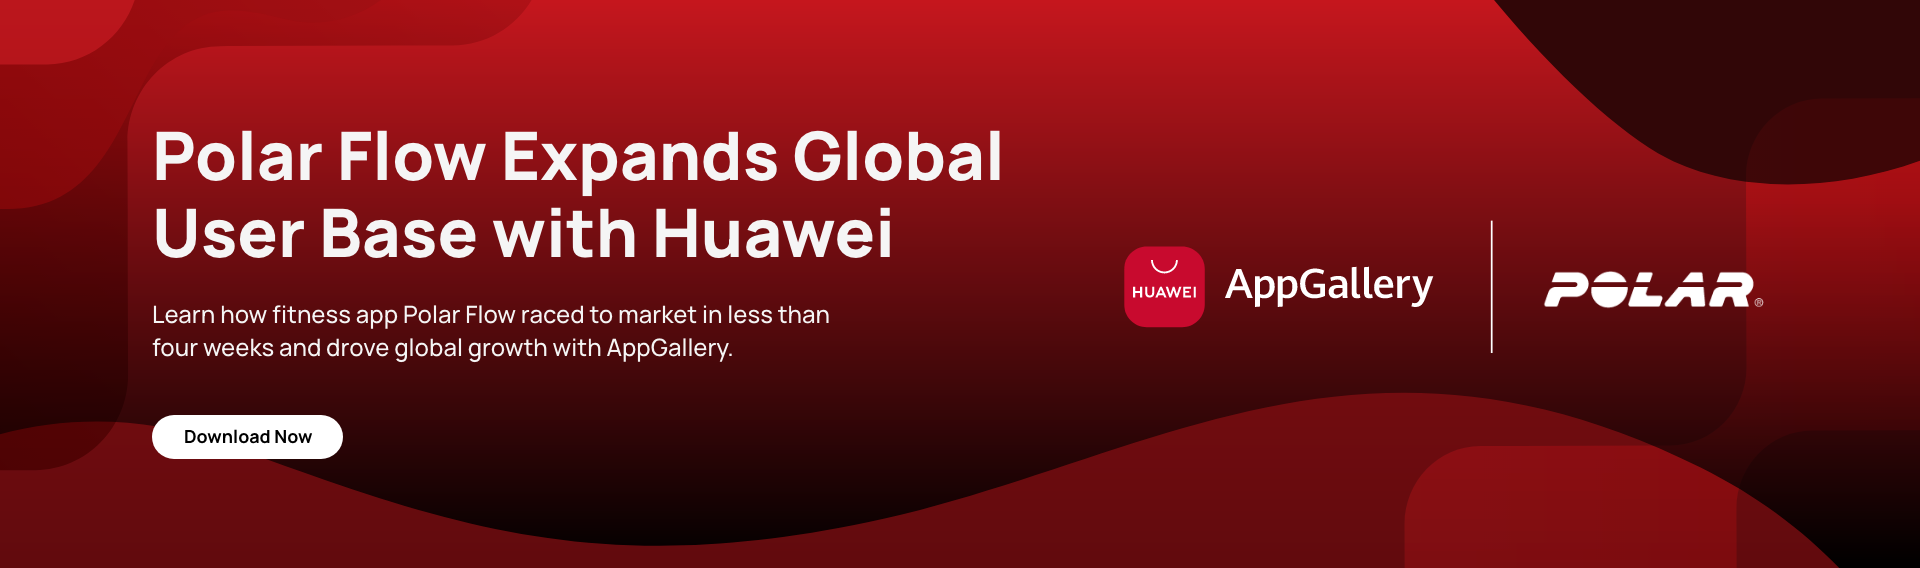 Polar Flow Expands Global User Base with Huawei